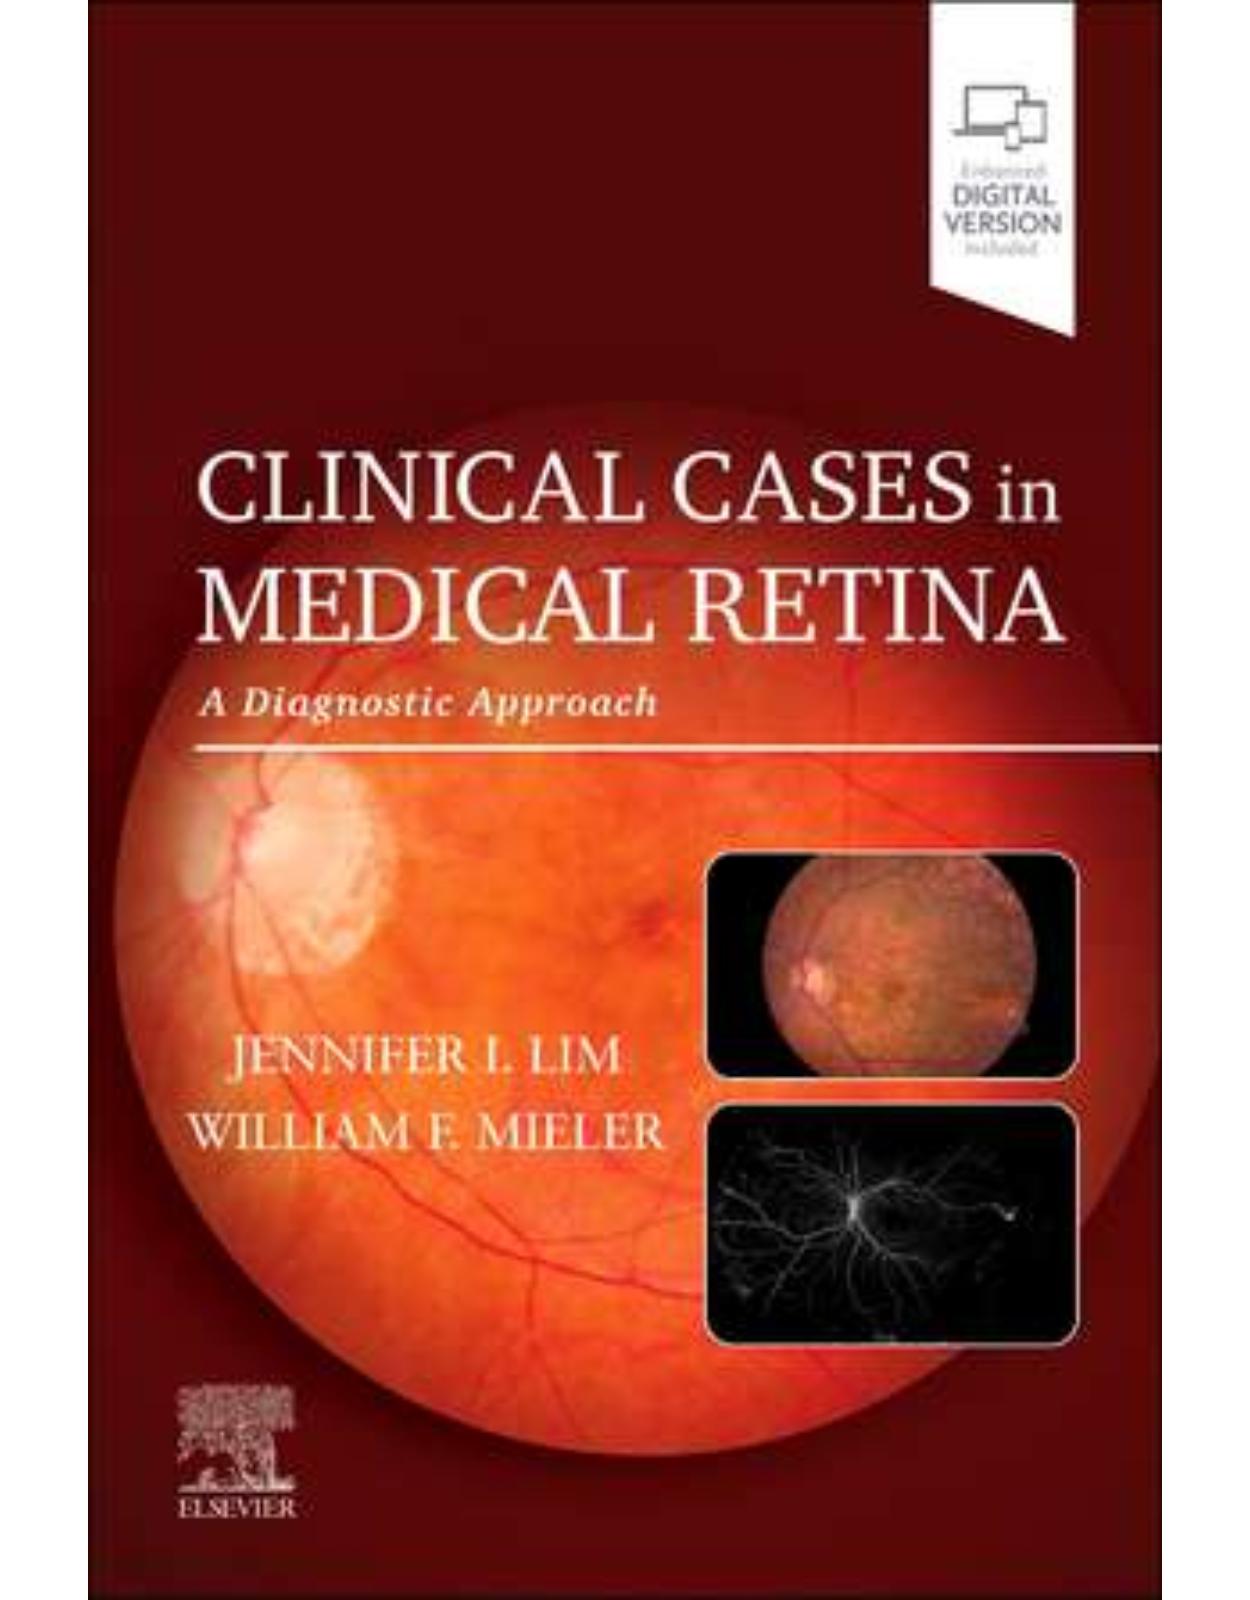 Clinical Cases in Medical Retina: A Diagnostic Approach